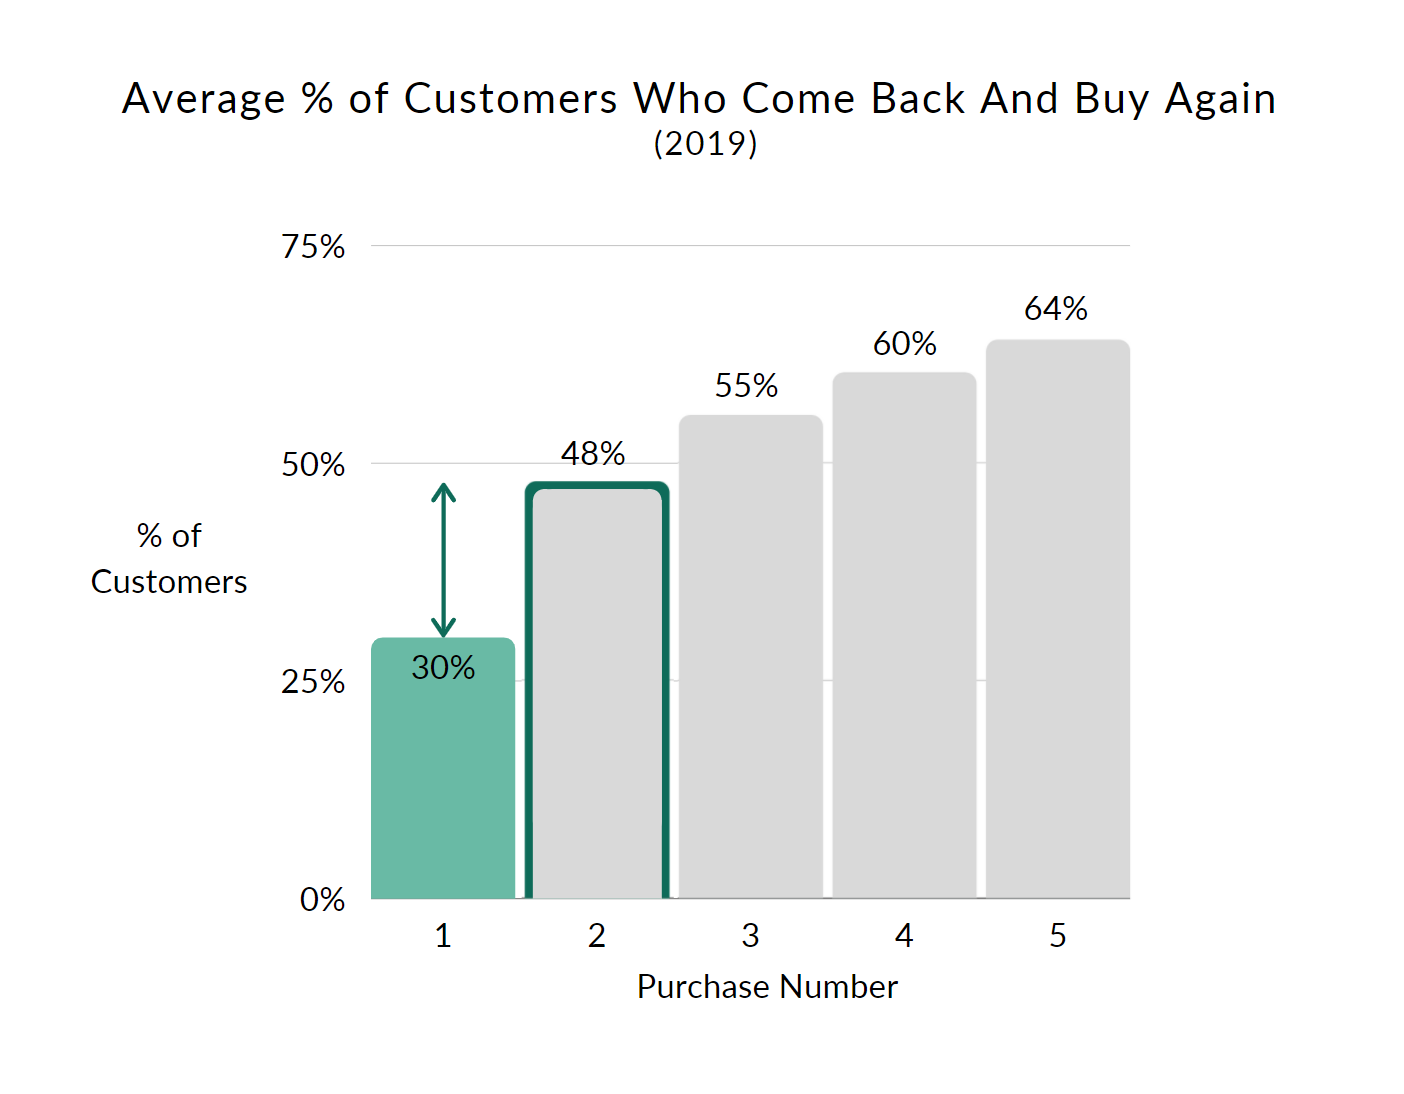 Average percentage of customers who came back and bought again by number of purchases in 2019